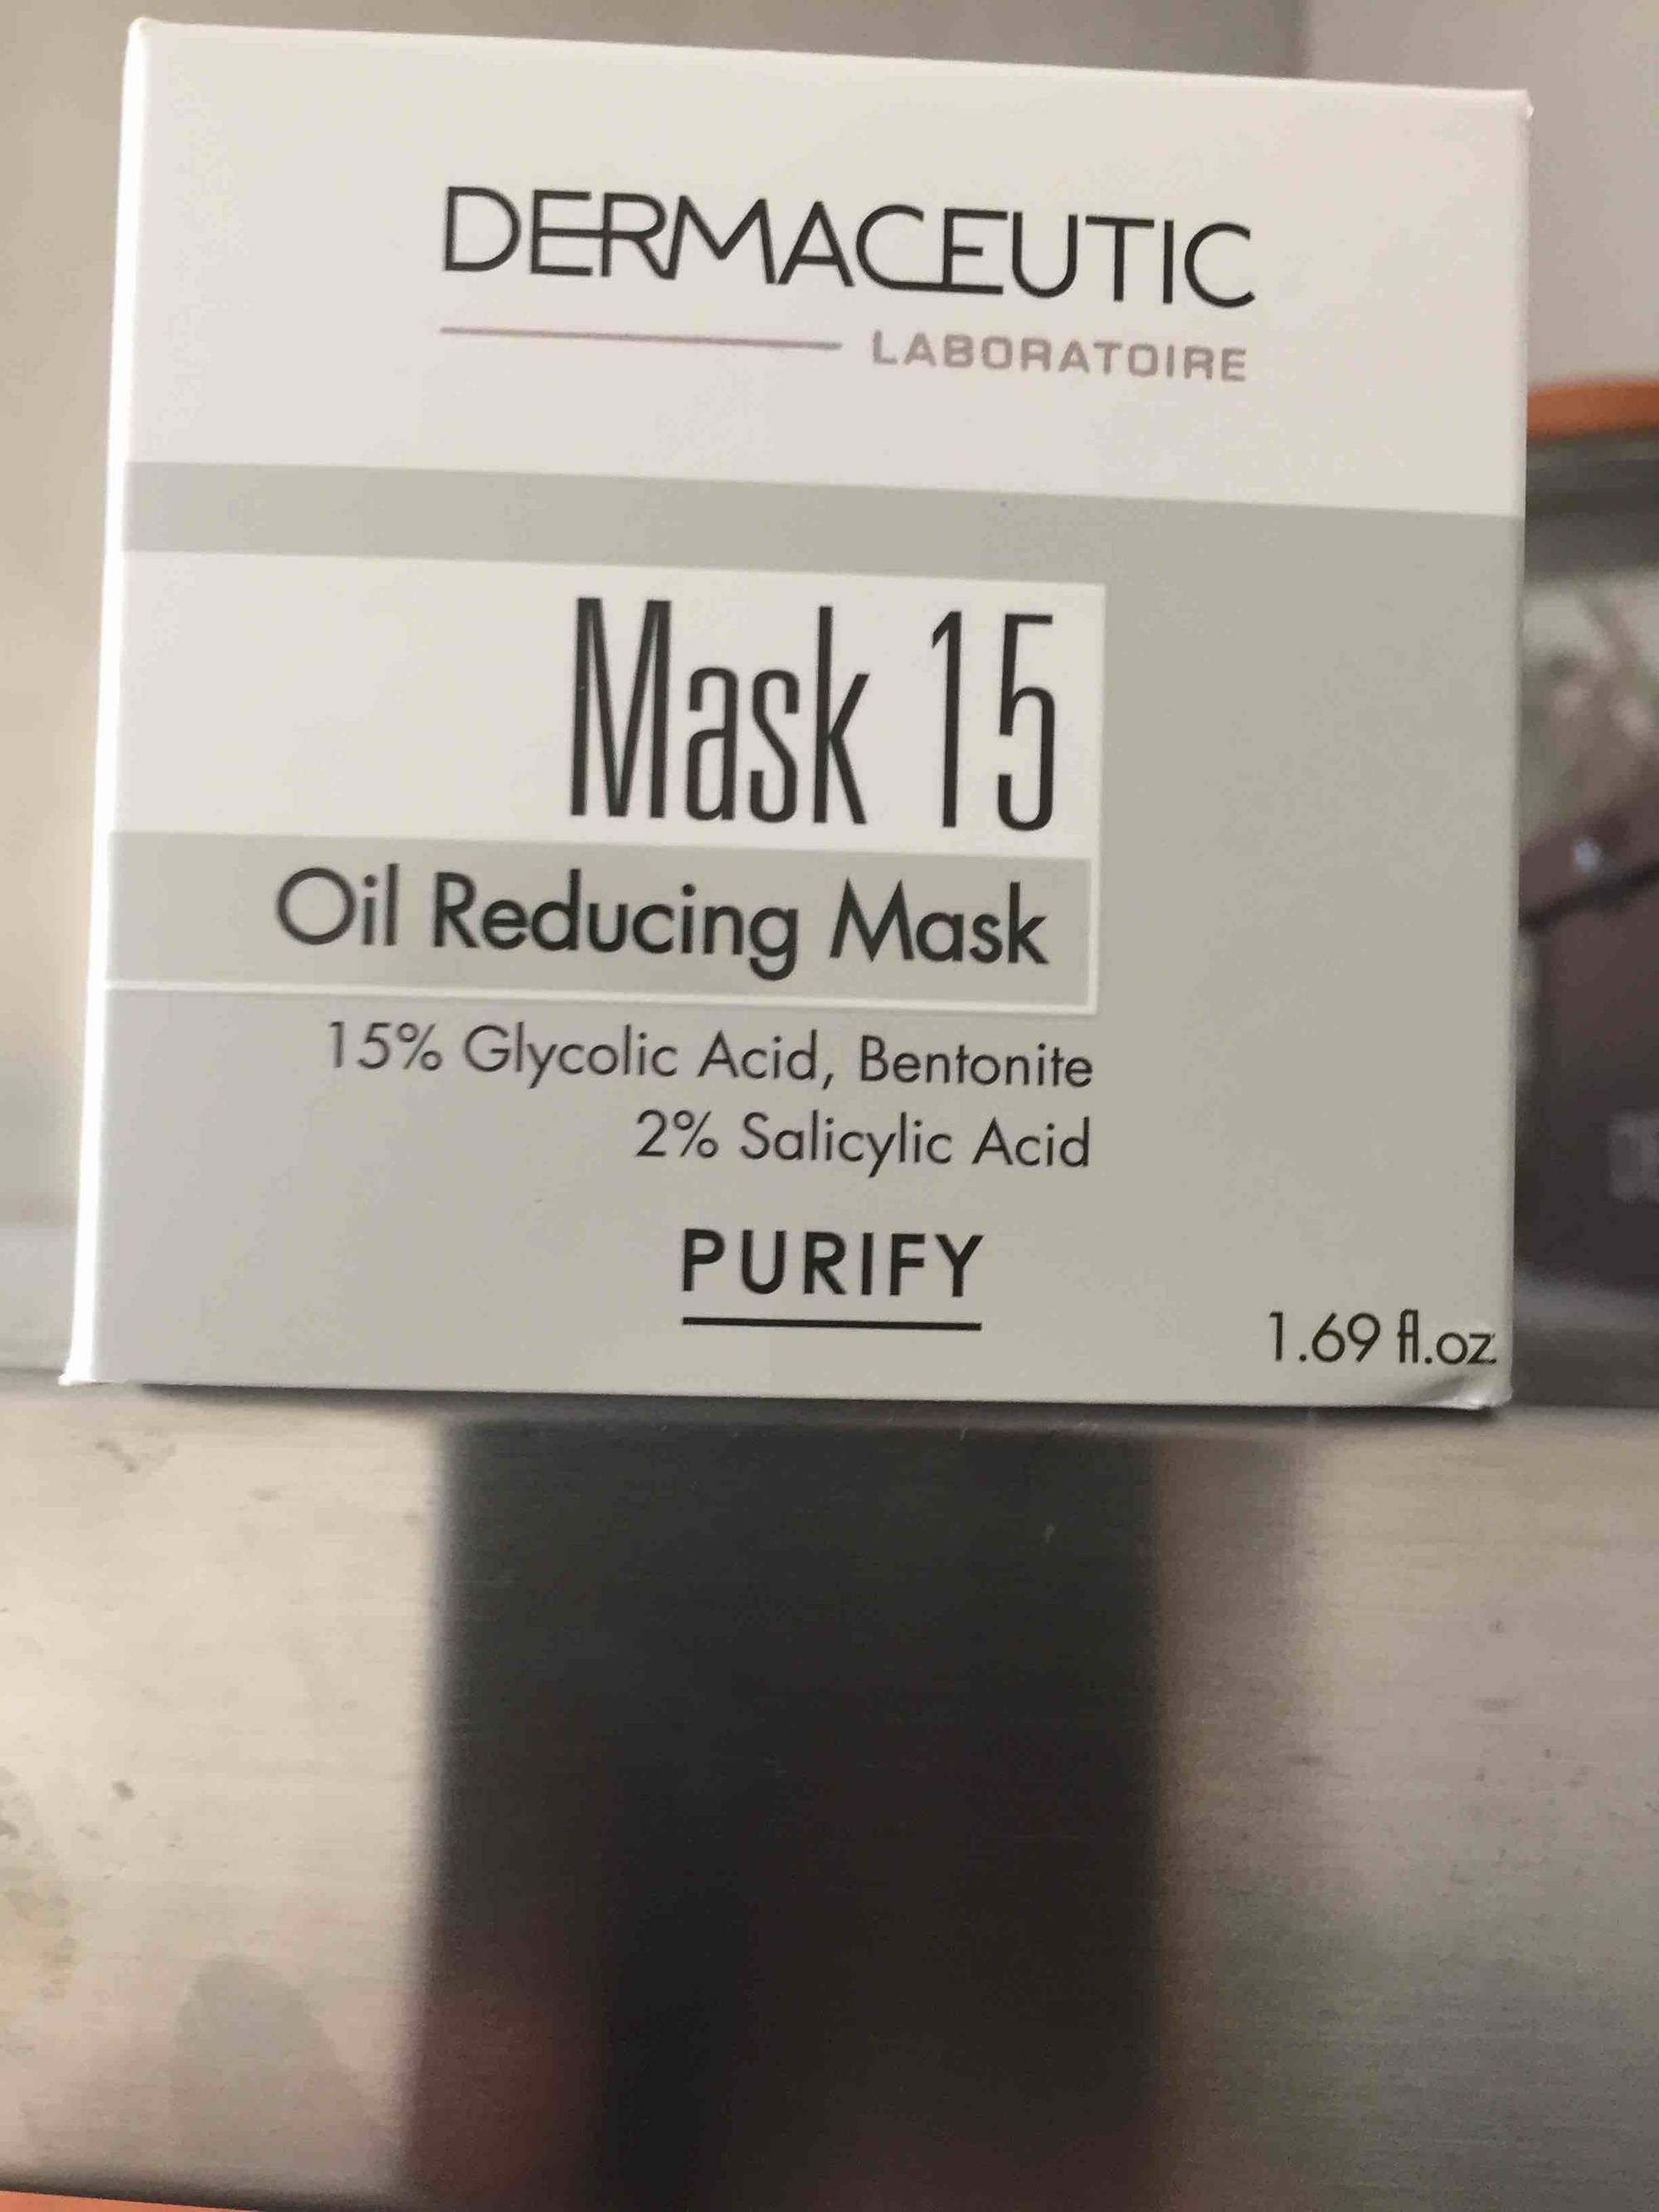 DERMACEUTIC - Purify - Mask 15